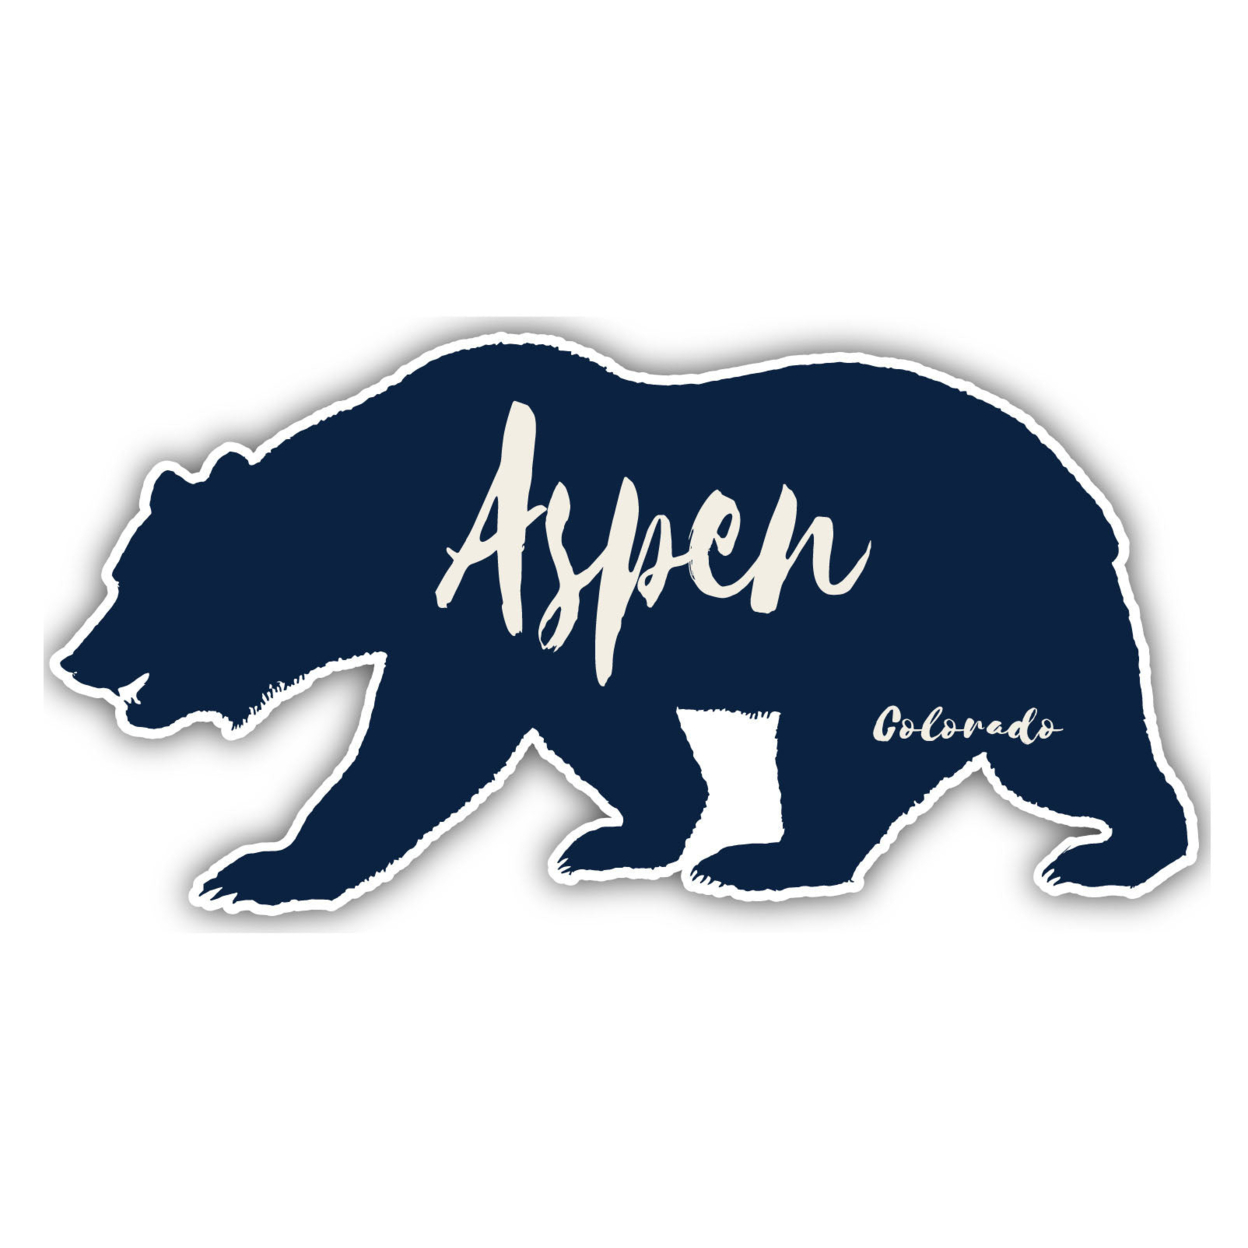 Aspen Colorado Souvenir Decorative Stickers (Choose Theme And Size) - 4-Pack, 6-Inch, Great Outdoors